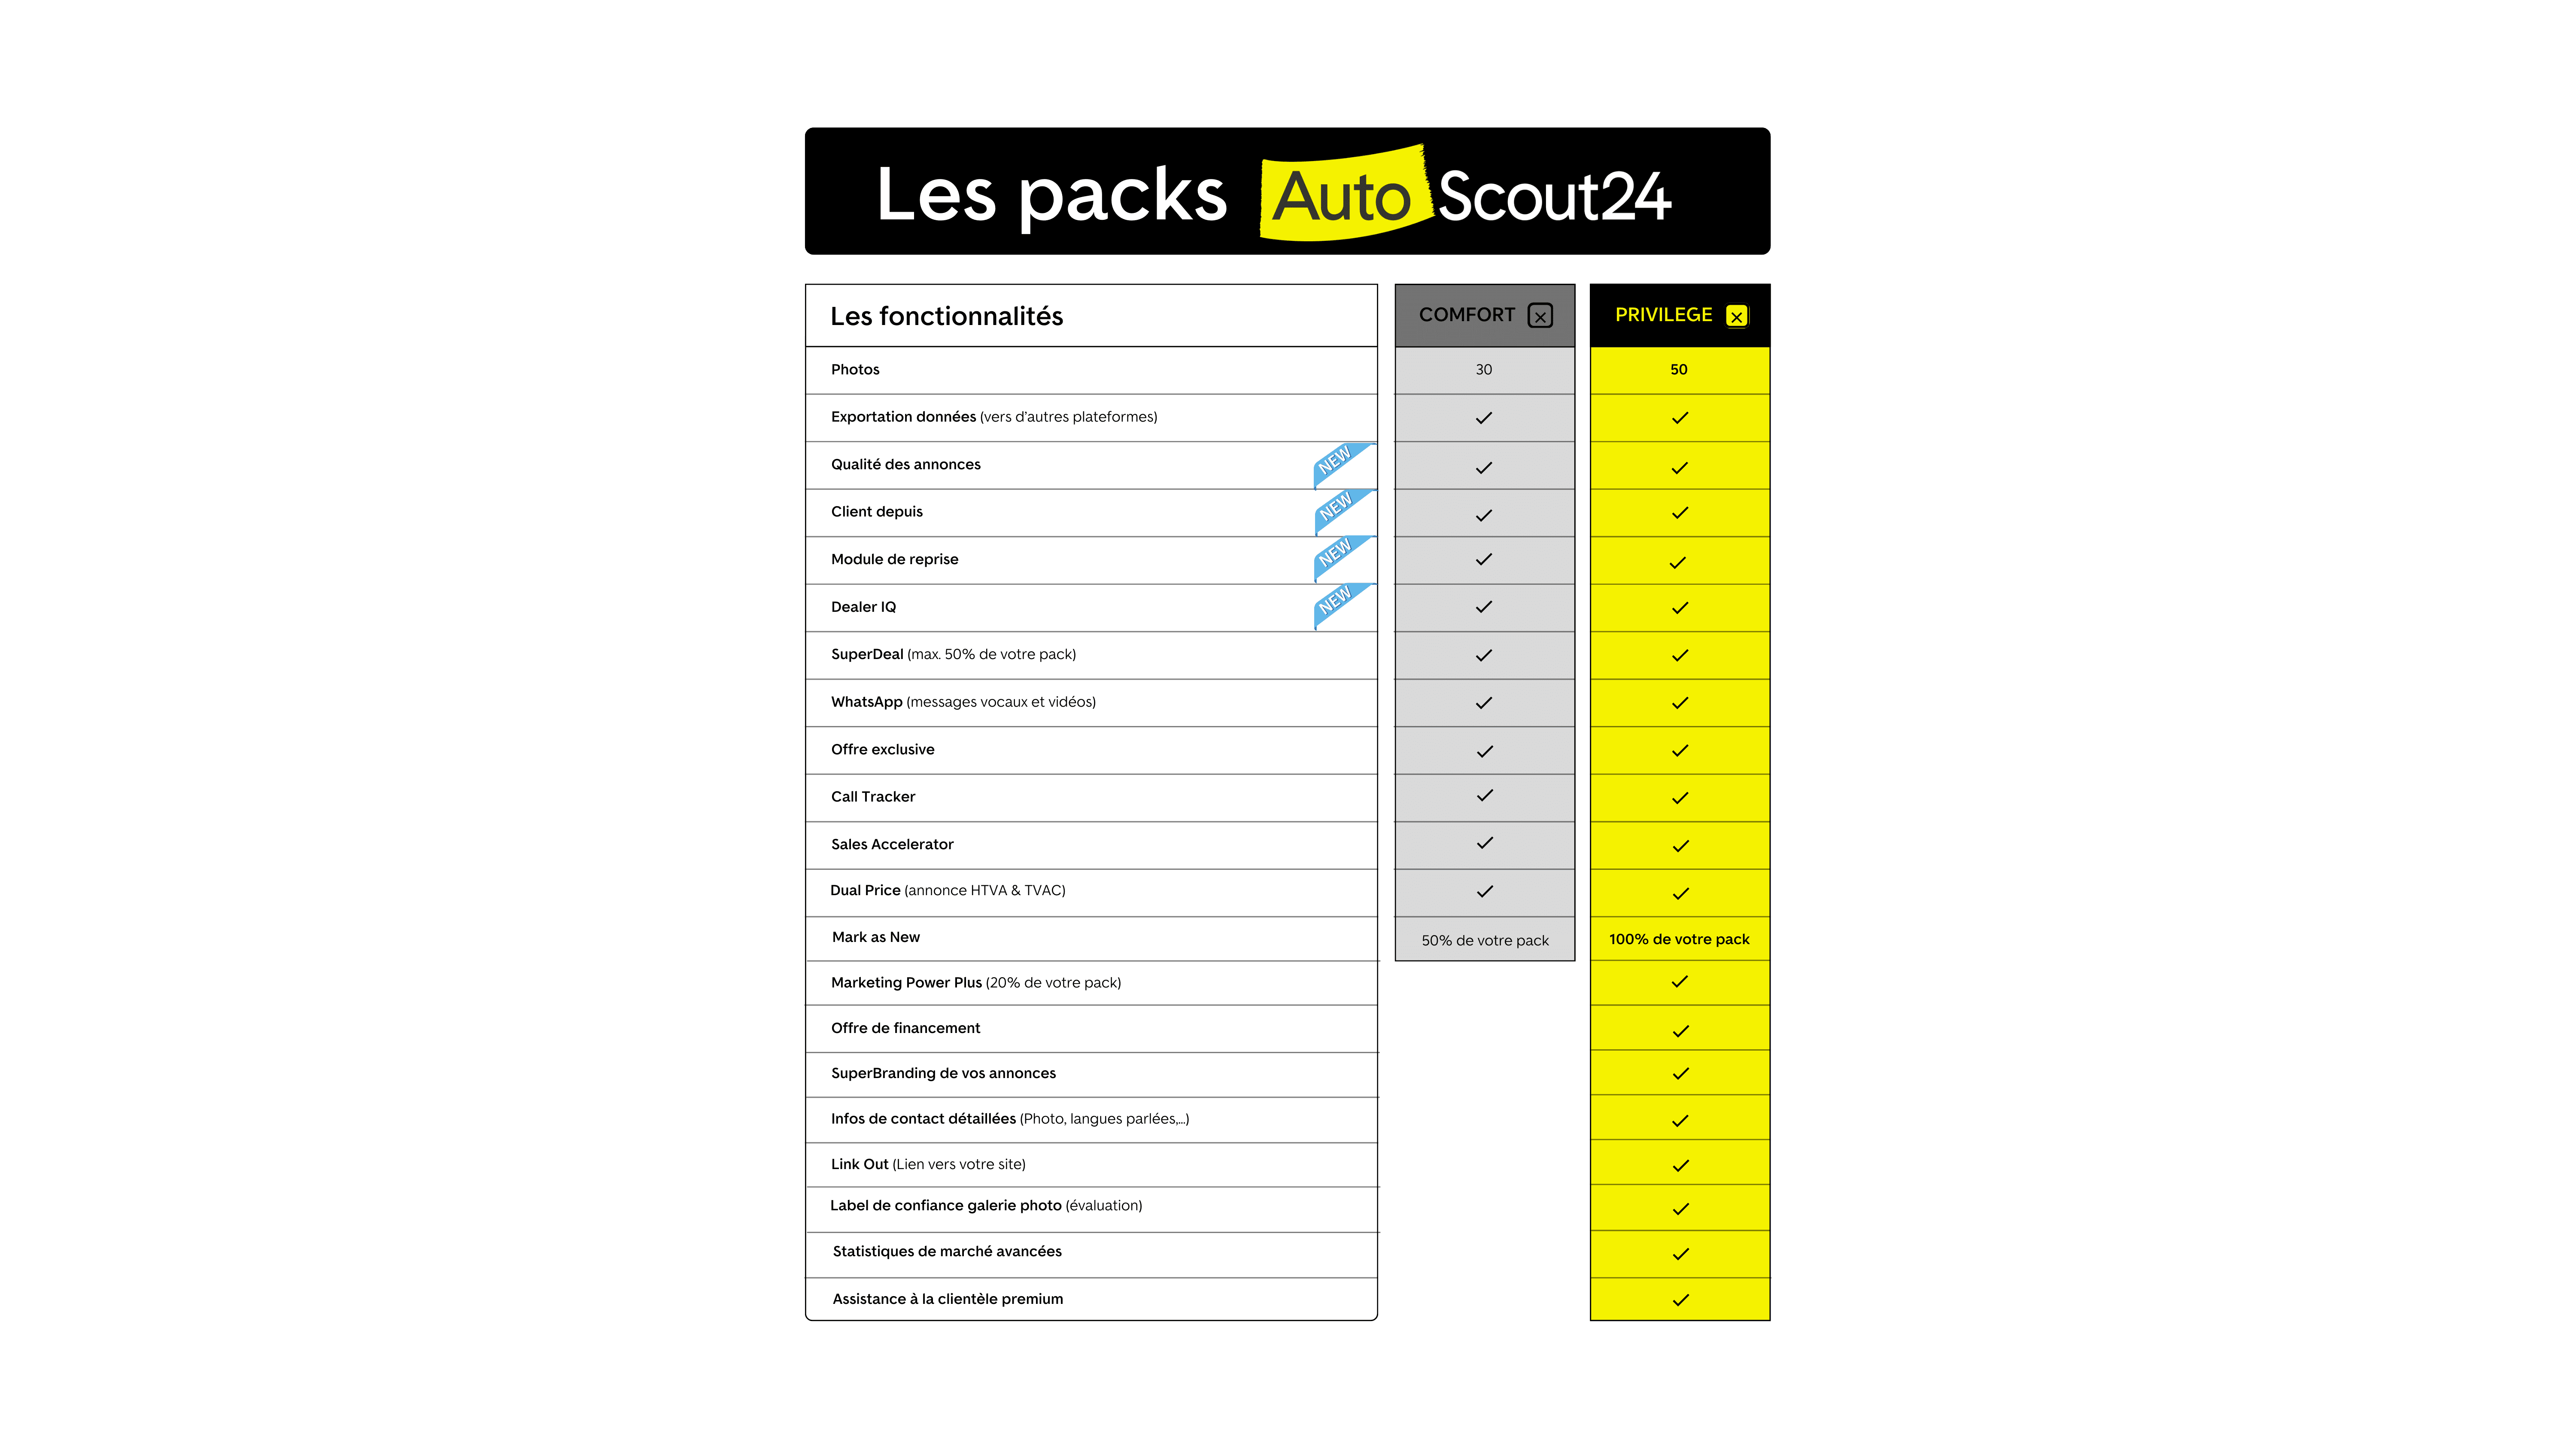 Packages AutoScout24